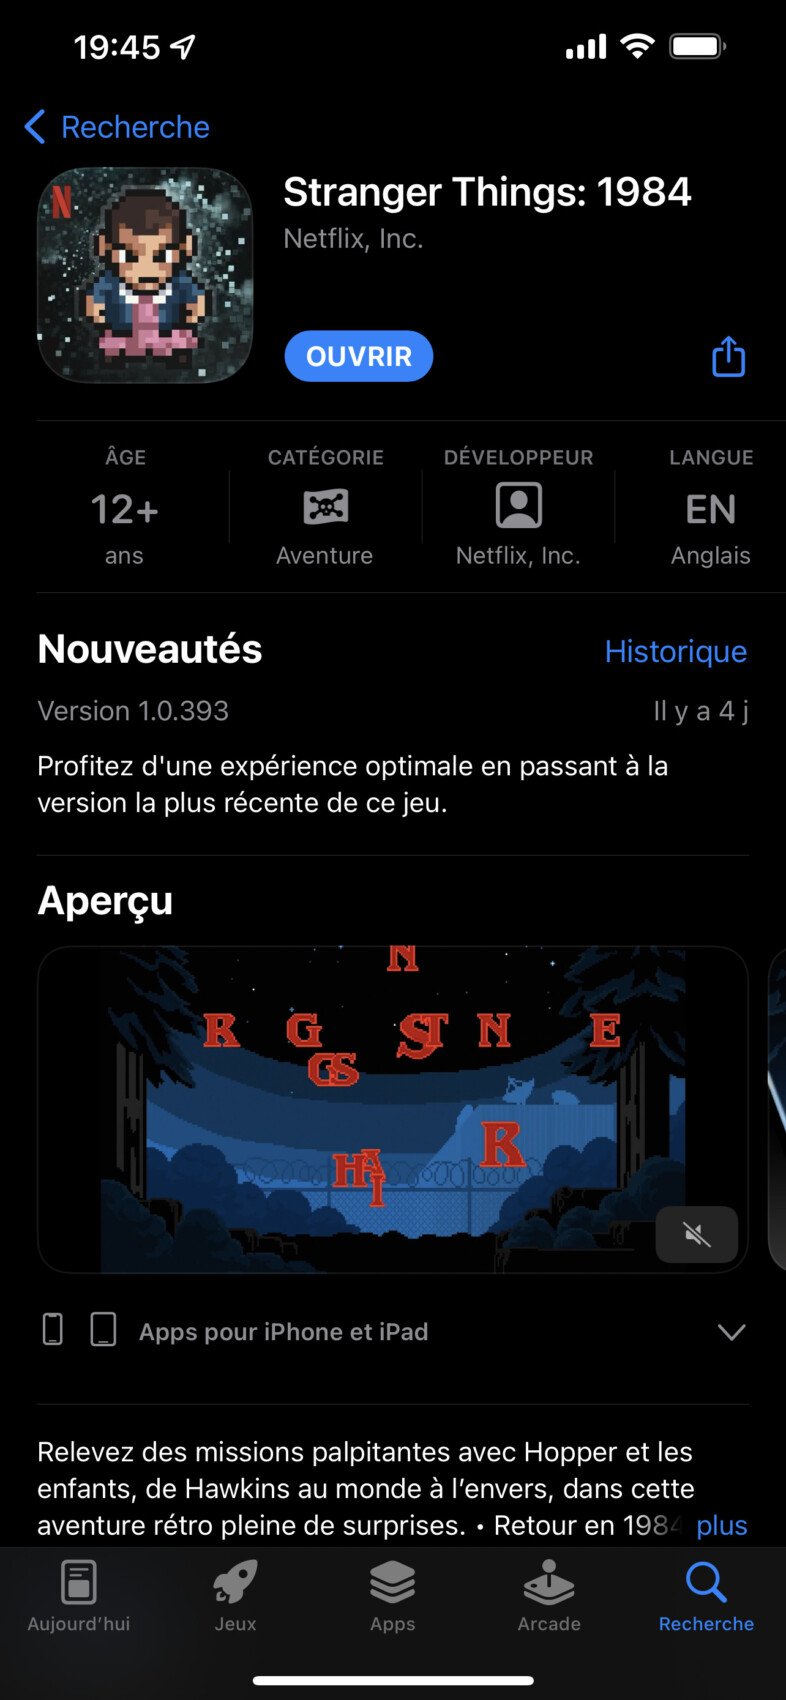 Netflix's Stranger Things: 1984 Game is available on the App Store